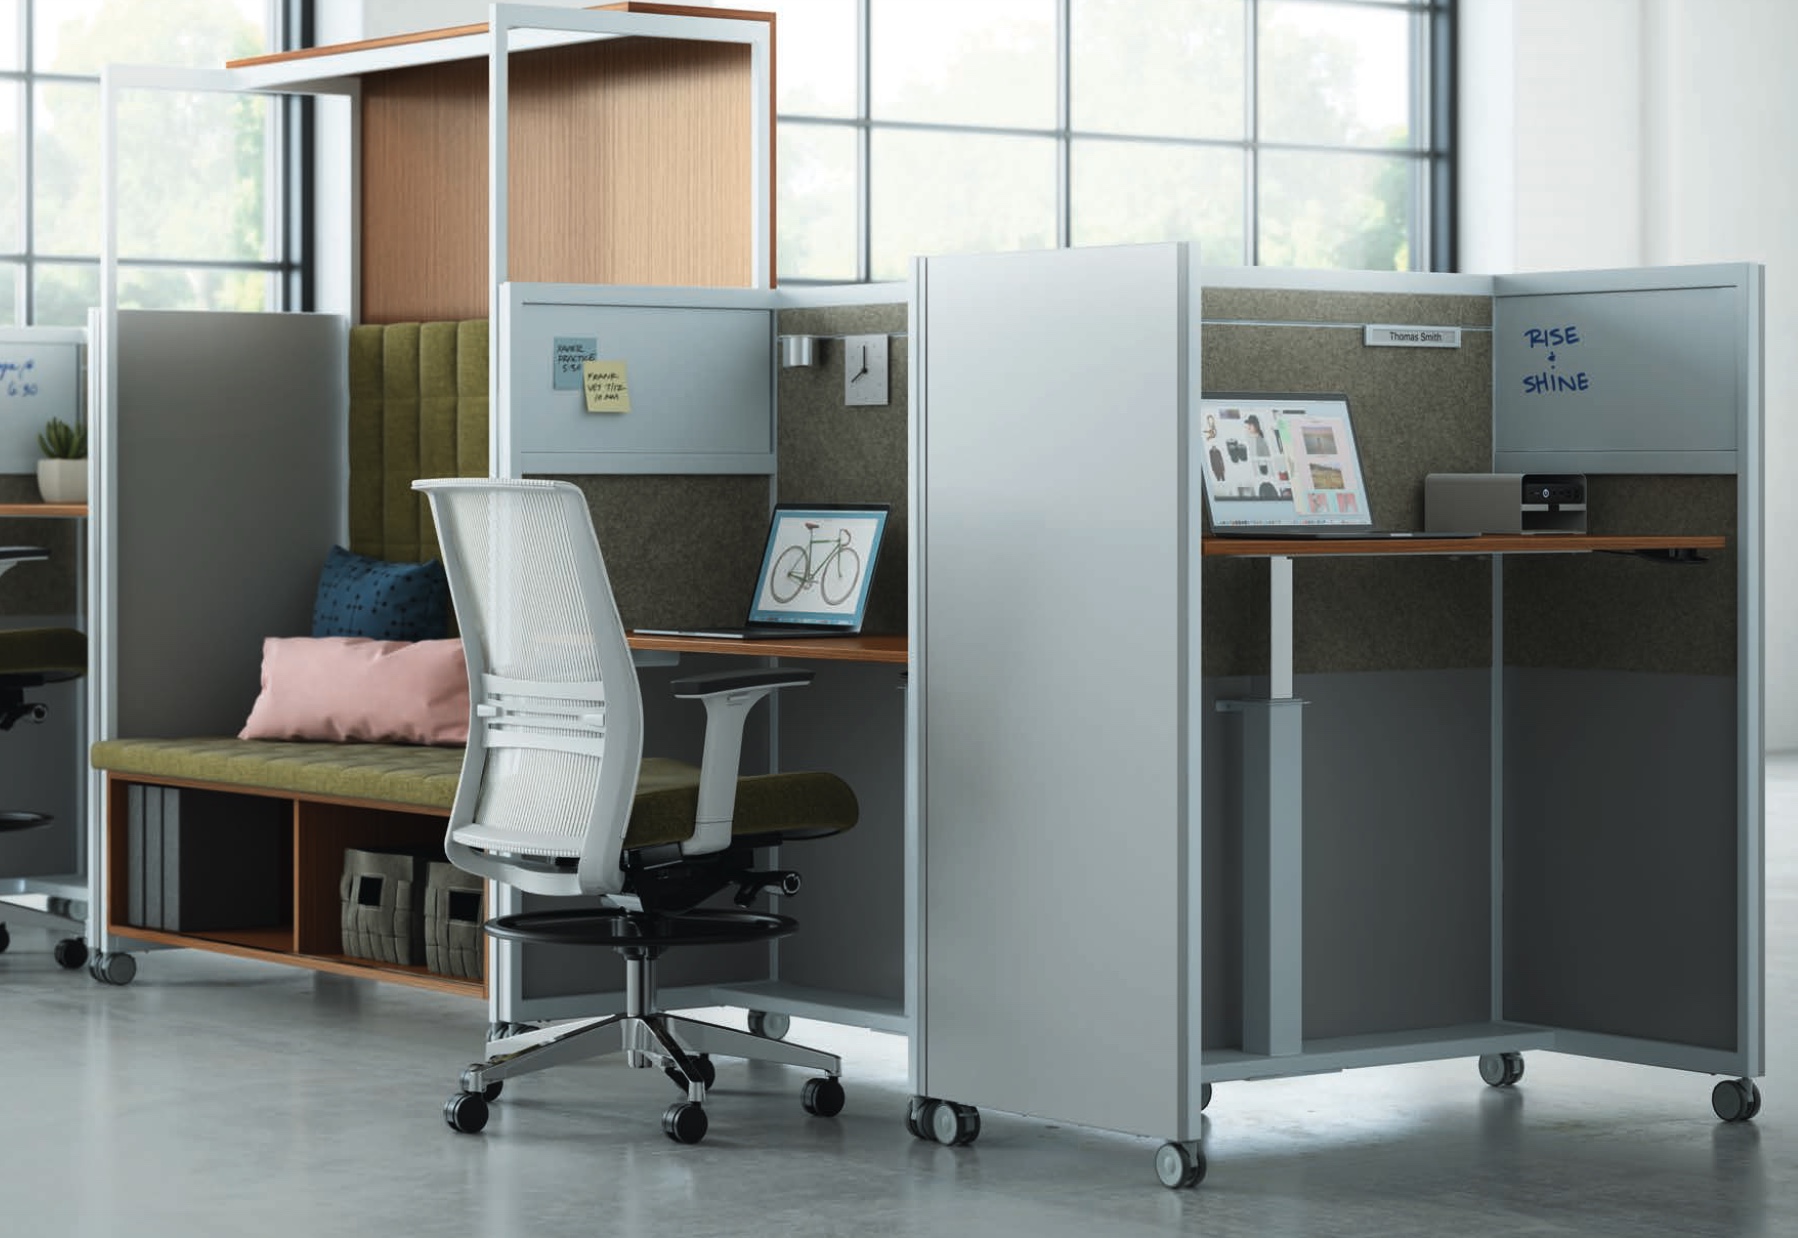 Kimball KORE Work Cart two adjoining workstations in gray finish